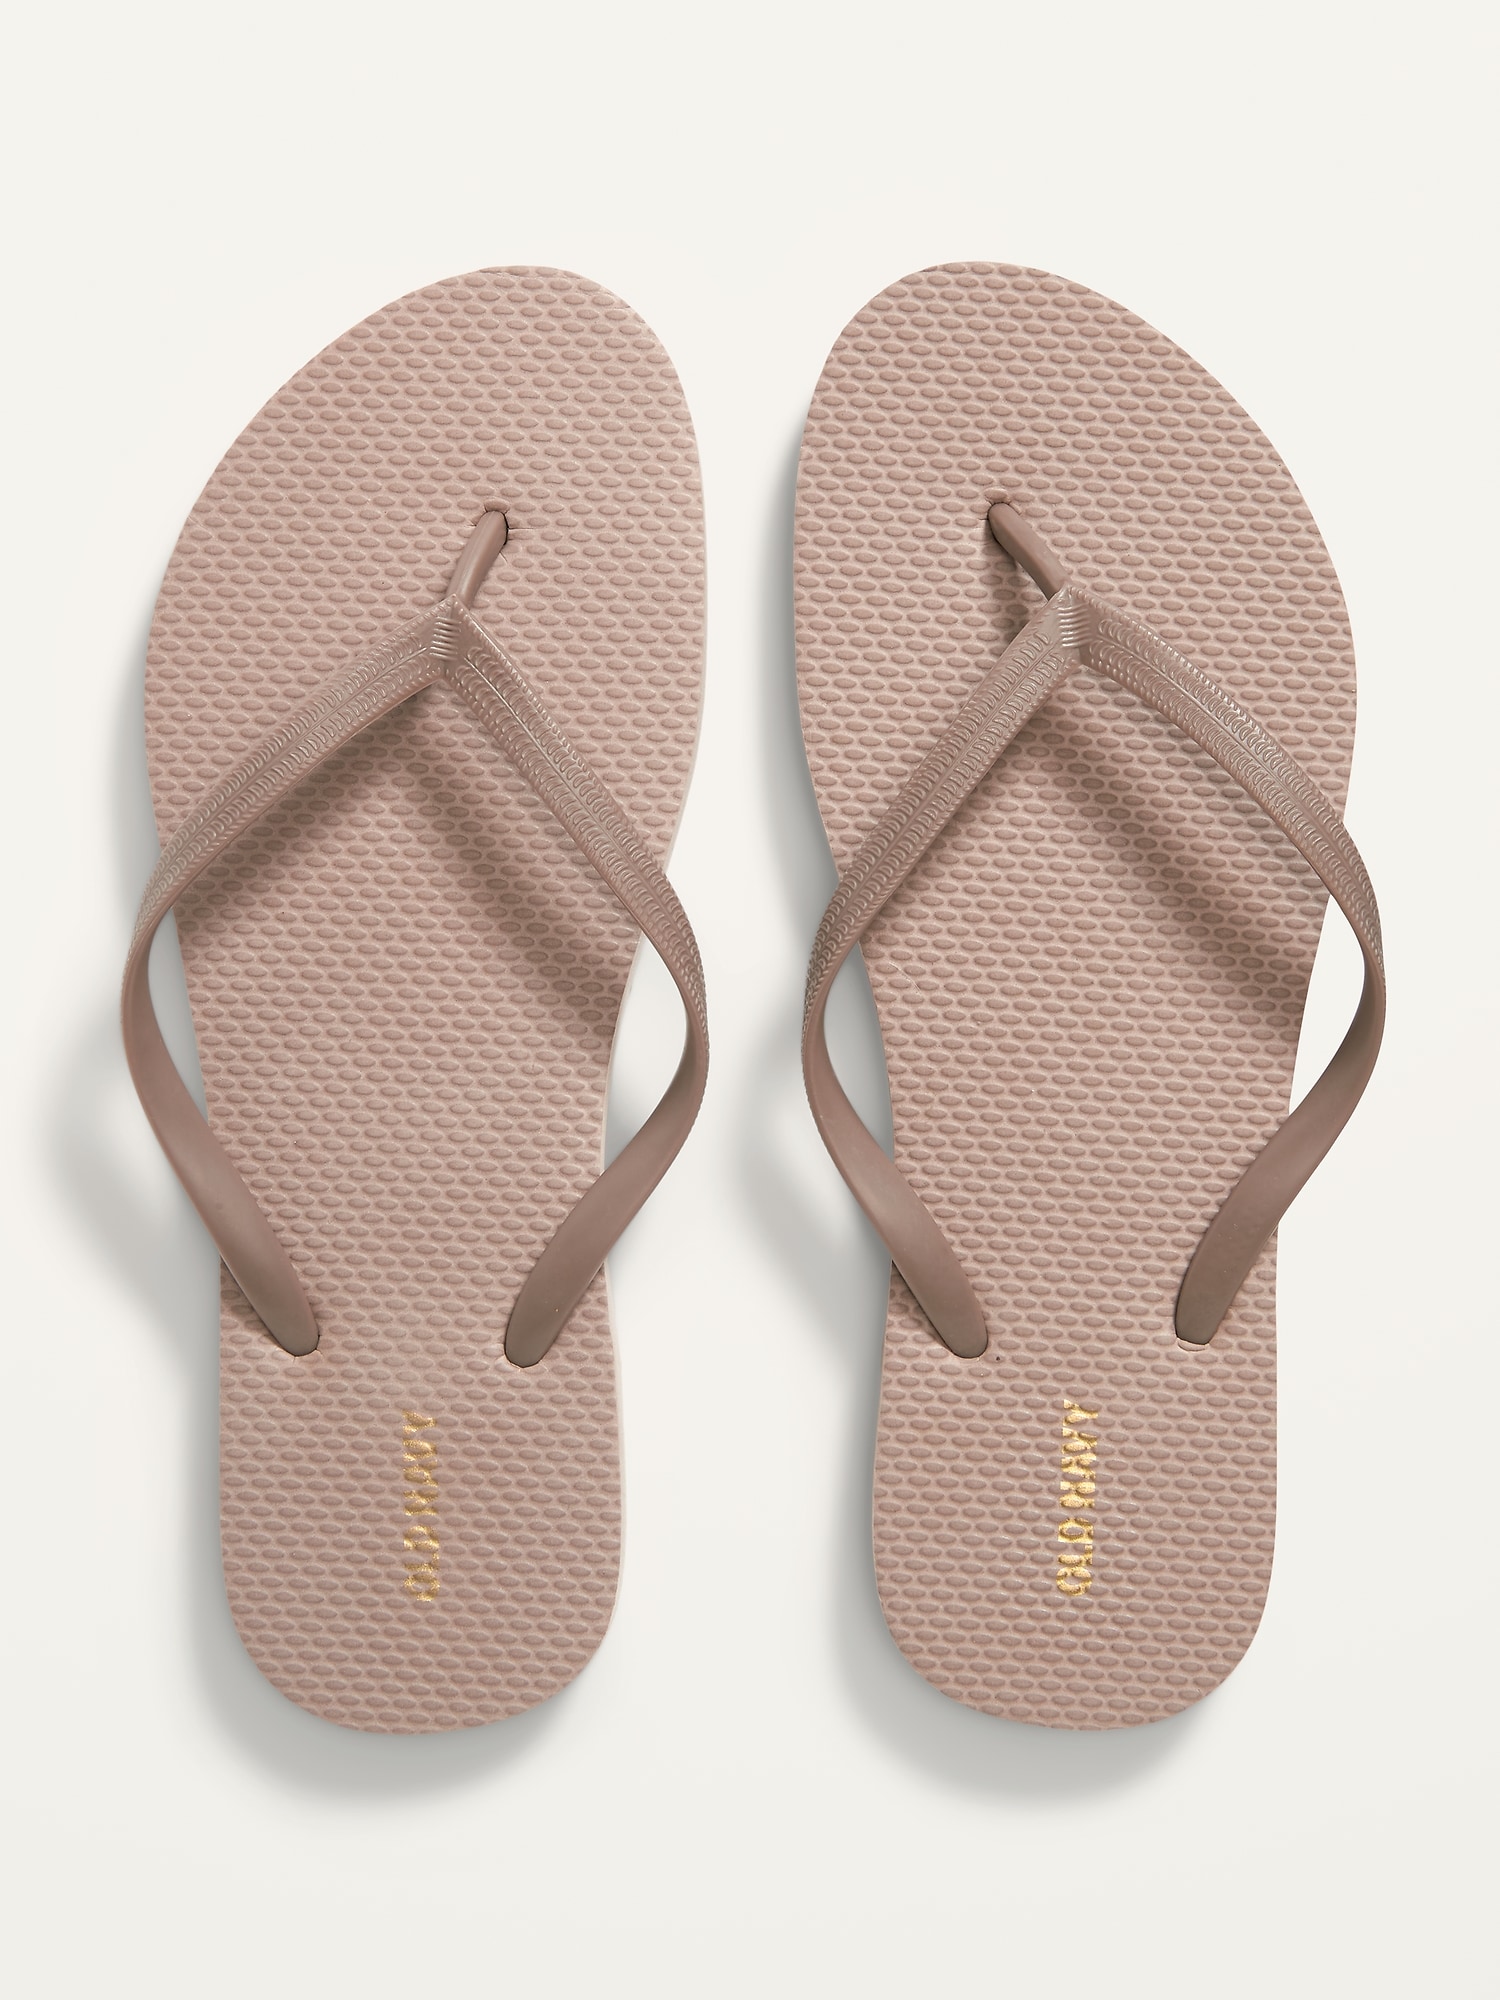 Old Navy Flip-Flop Sandals (Partially Plant-Based) brown. 1